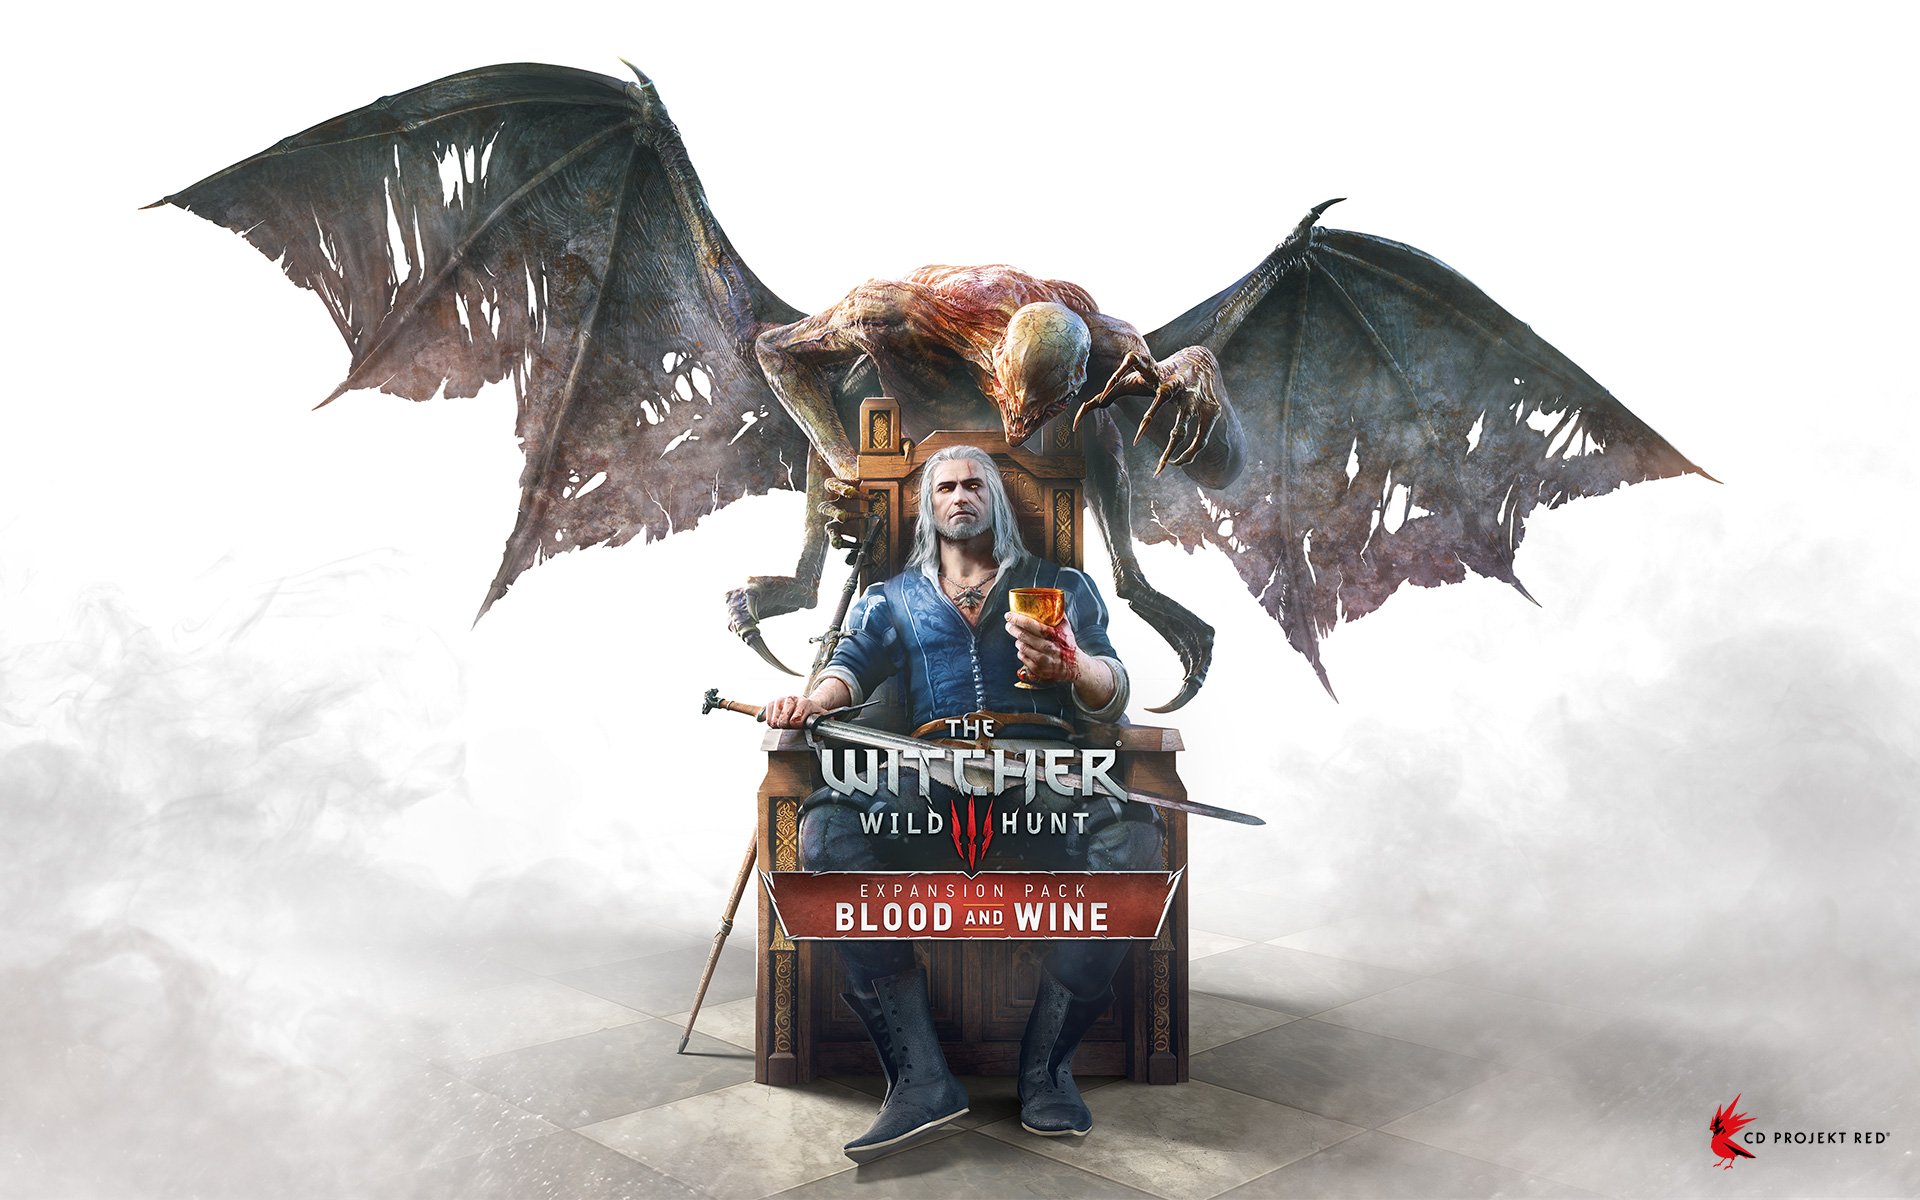 the witcher 3 blood and wine wallpaper,pc game,games,action figure,illustration,fictional character